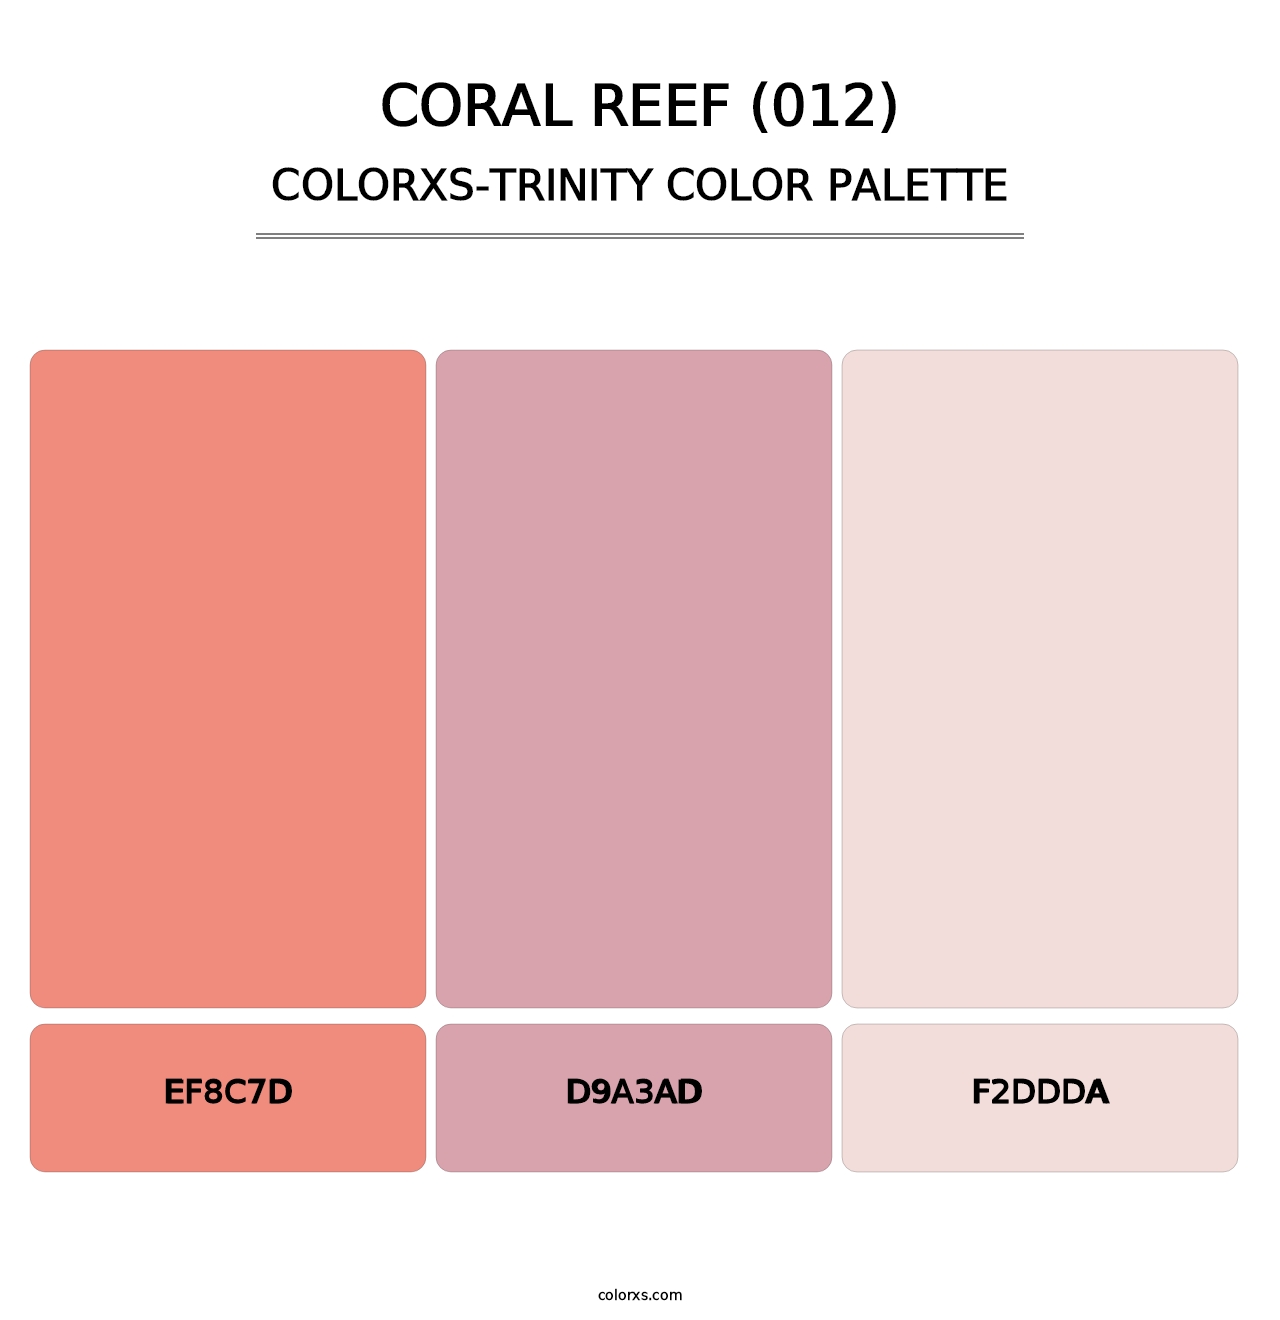 Coral Reef (012) - Colorxs Trinity Palette